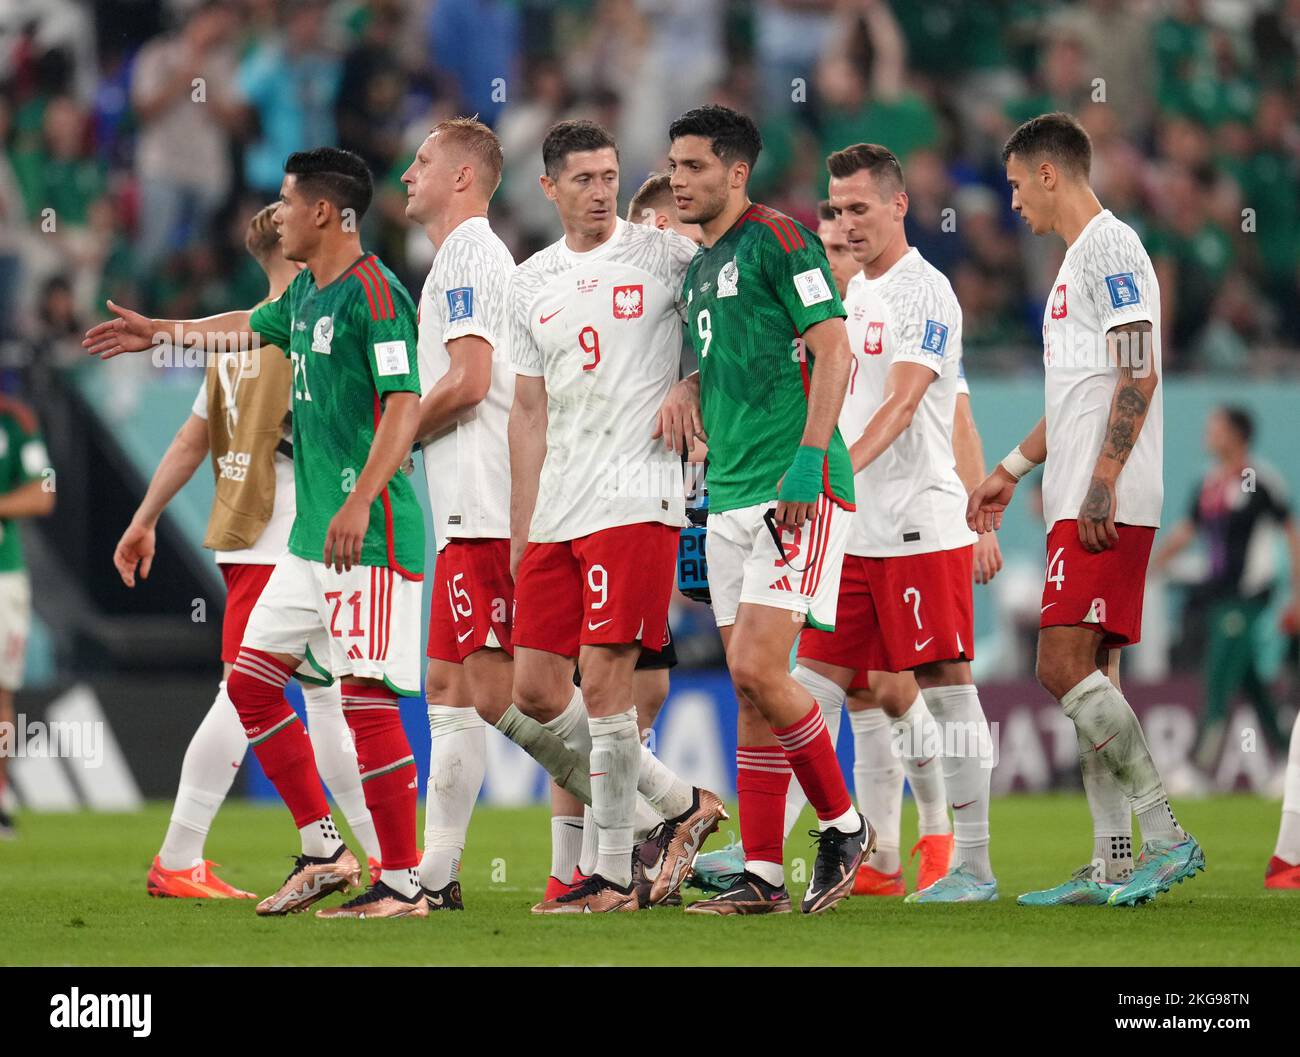 Poland's Robert Lewandowski greets Mexico's Raul Jimenez following the FIFA World Cup Group C match at Stadium 974, Rass Abou Aboud. Picture date: Tuesday November 22, 2022. Stock Photo